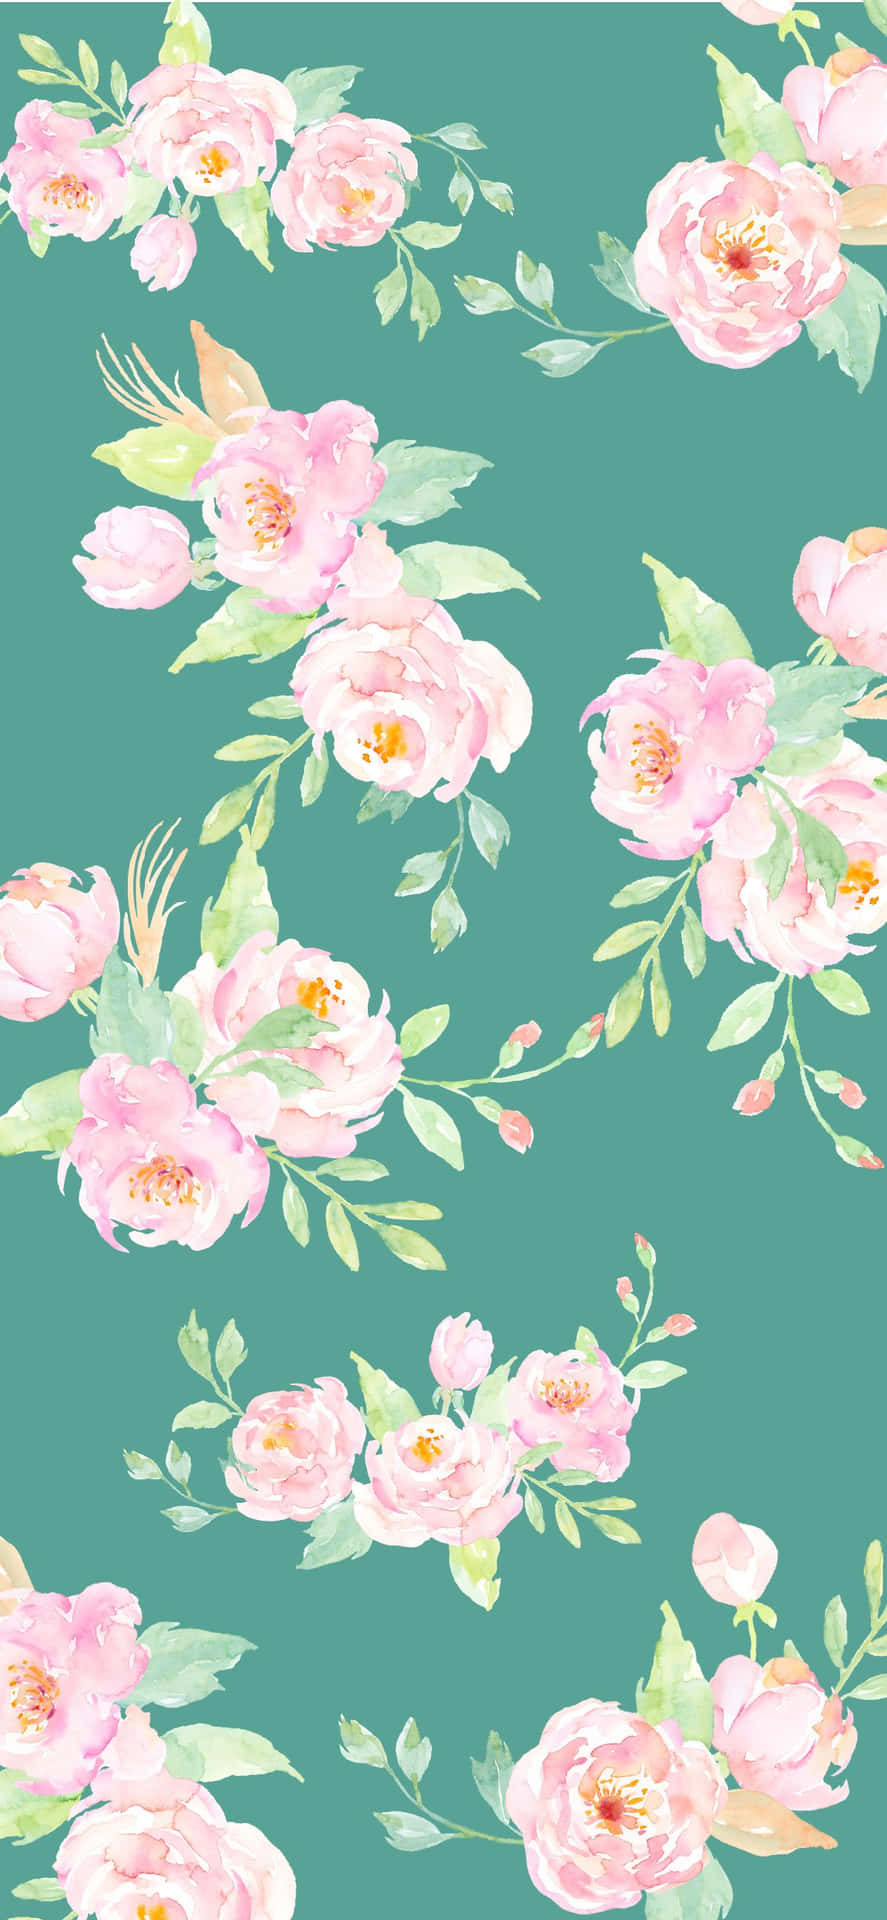 A Watercolor Floral Pattern With Pink Flowers On A Teal Background